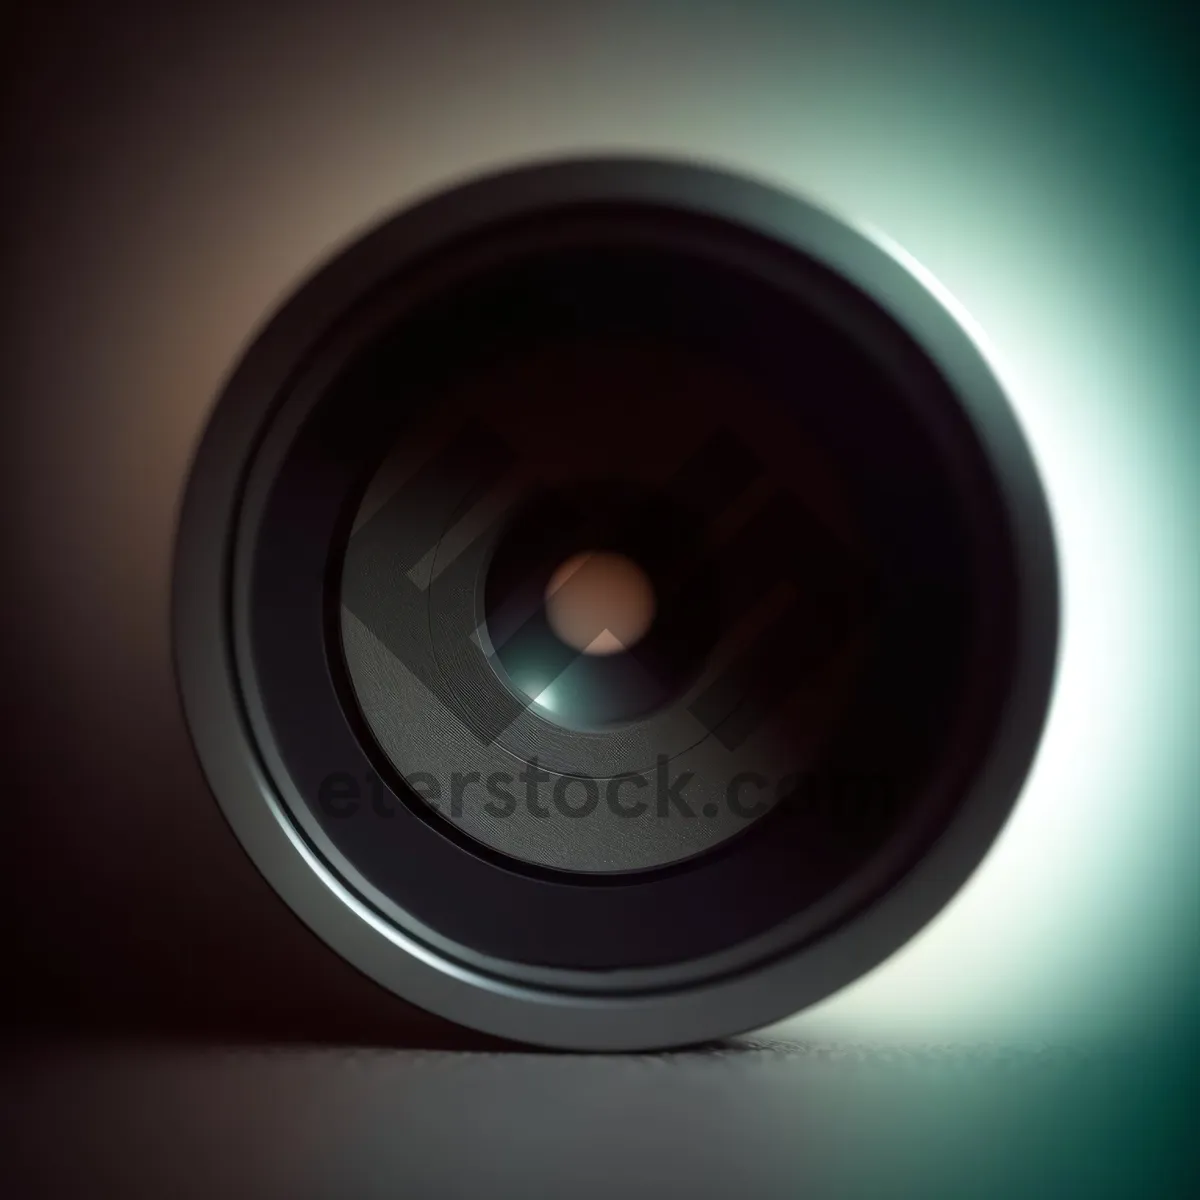 Picture of Modern Shiny Black Button with Orange Reflection